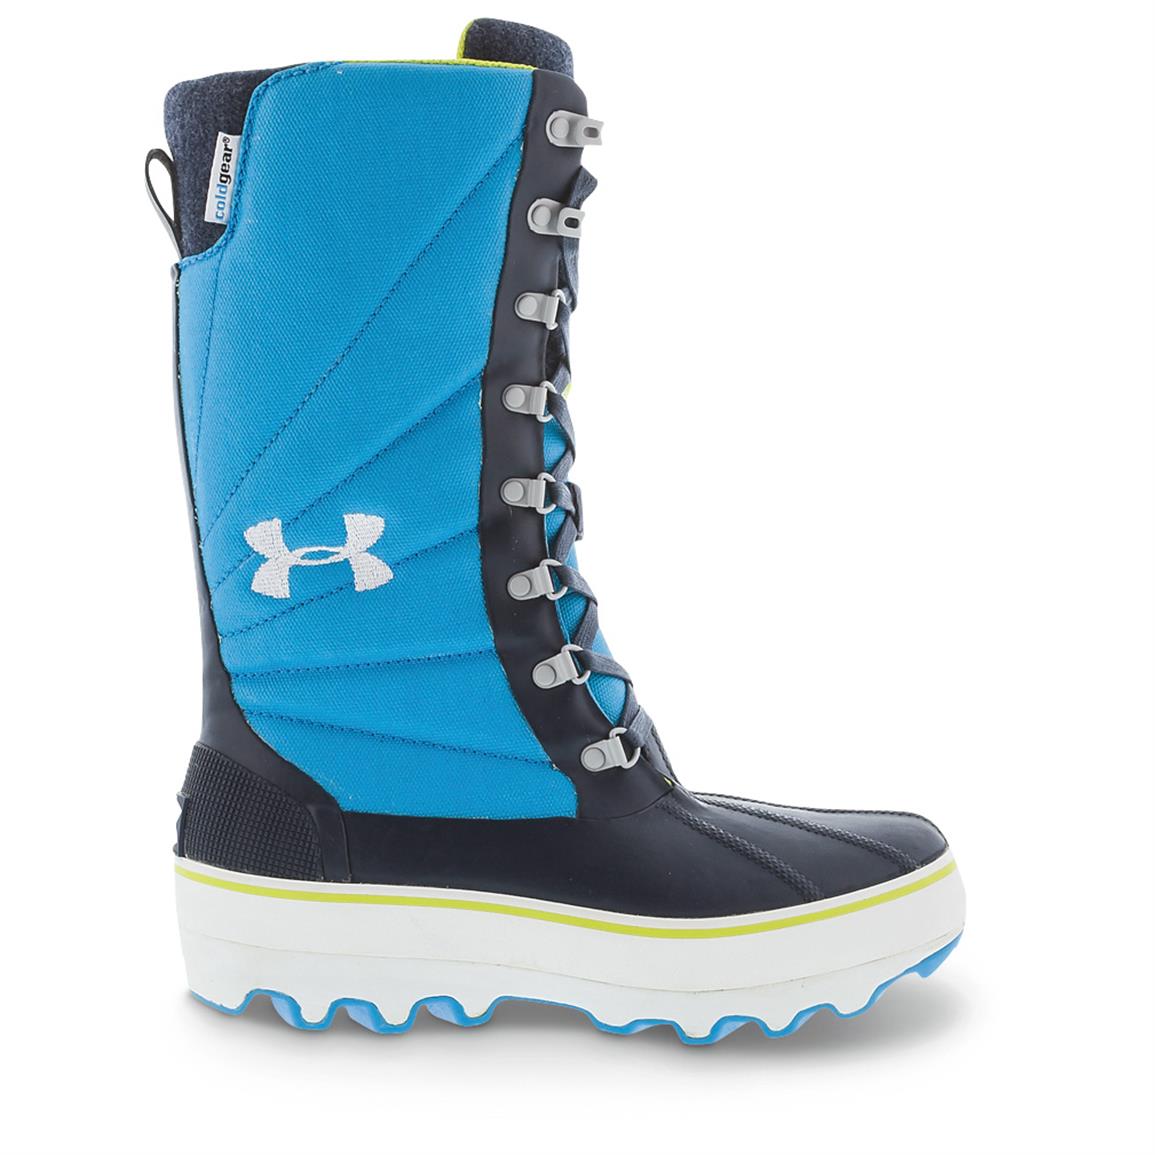 Under Armour Women's Clackamas Winter Boots - 592638, Winter & Snow Boots at Sportsman's Guide